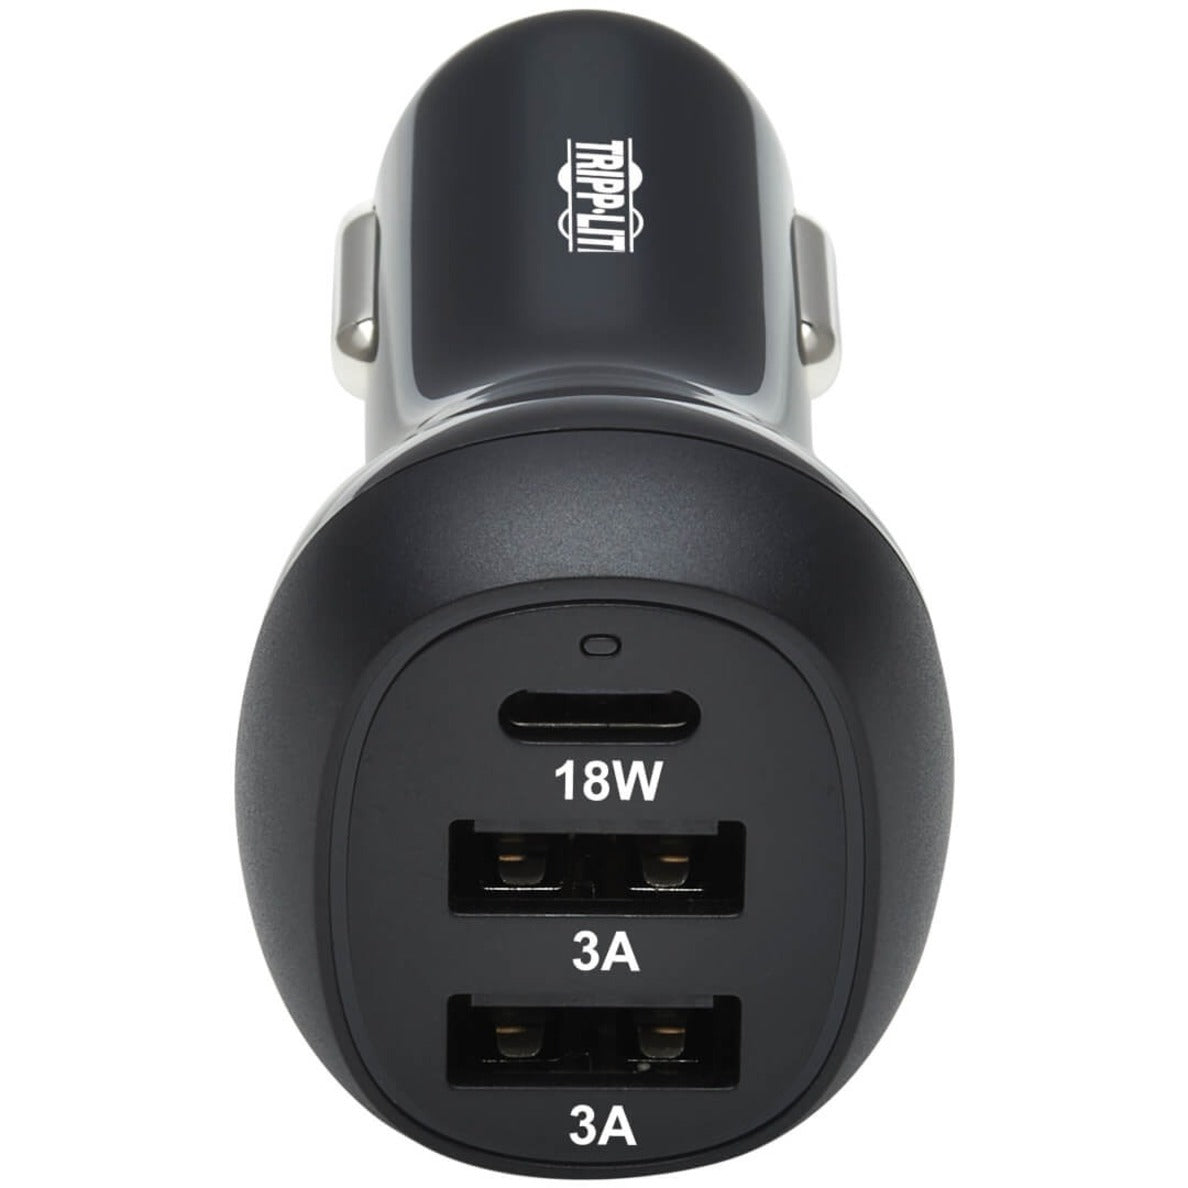 Tripp Lite U280-C03-36W-1B USB CAR CHARGER 3-PORT, 36W USB C 2 USB-A, Fast Charging for Smartphones, Tablets, and More